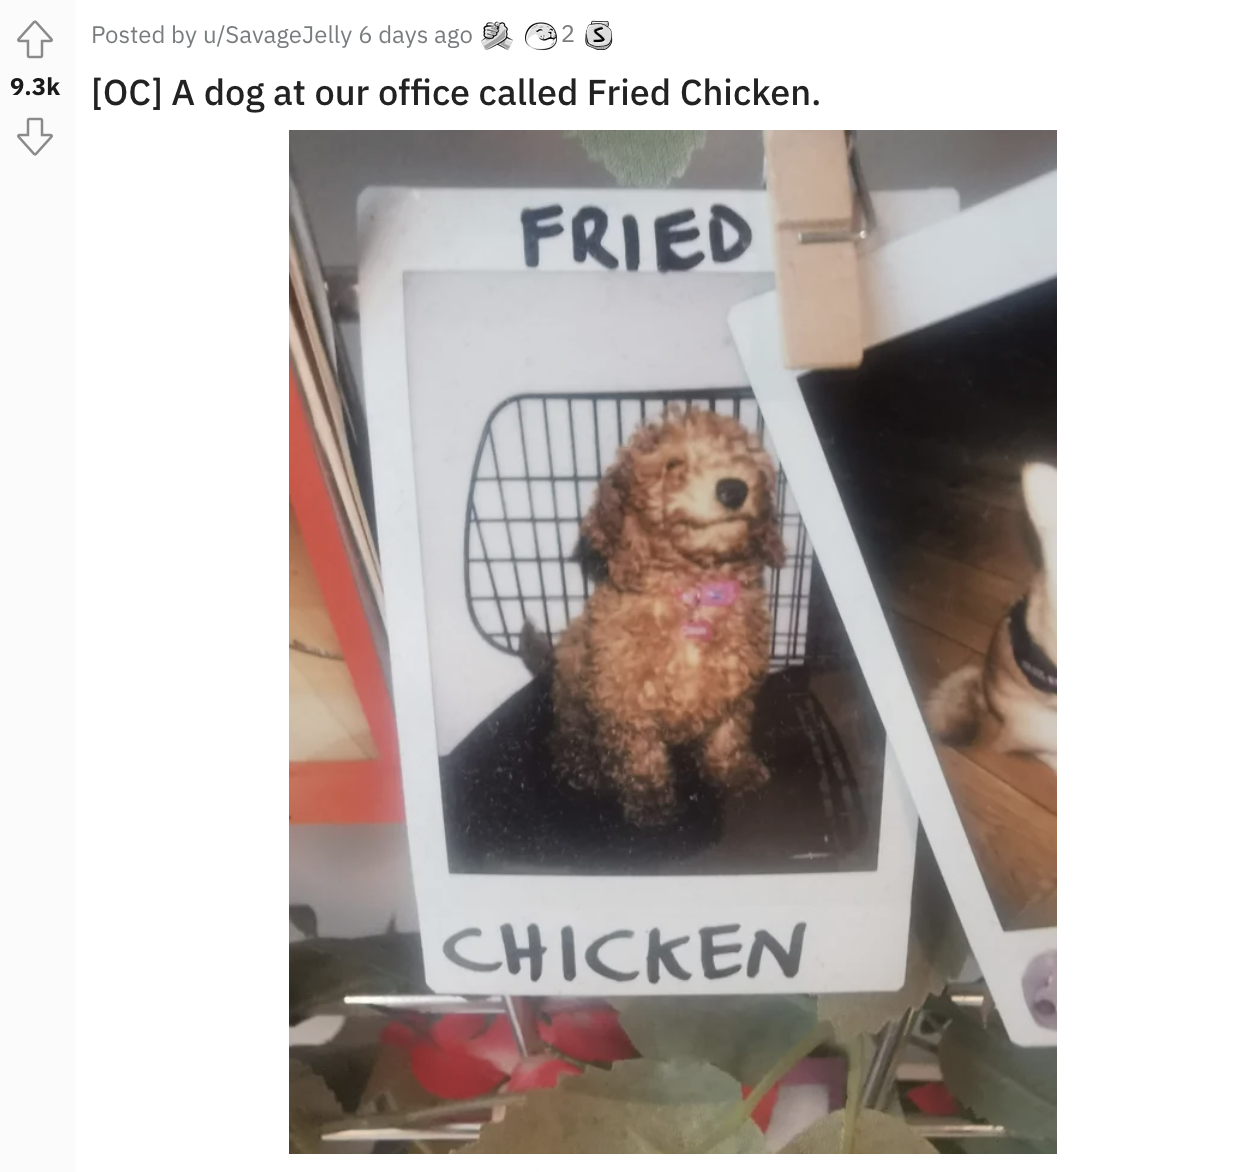 A dog named Fried Chicken